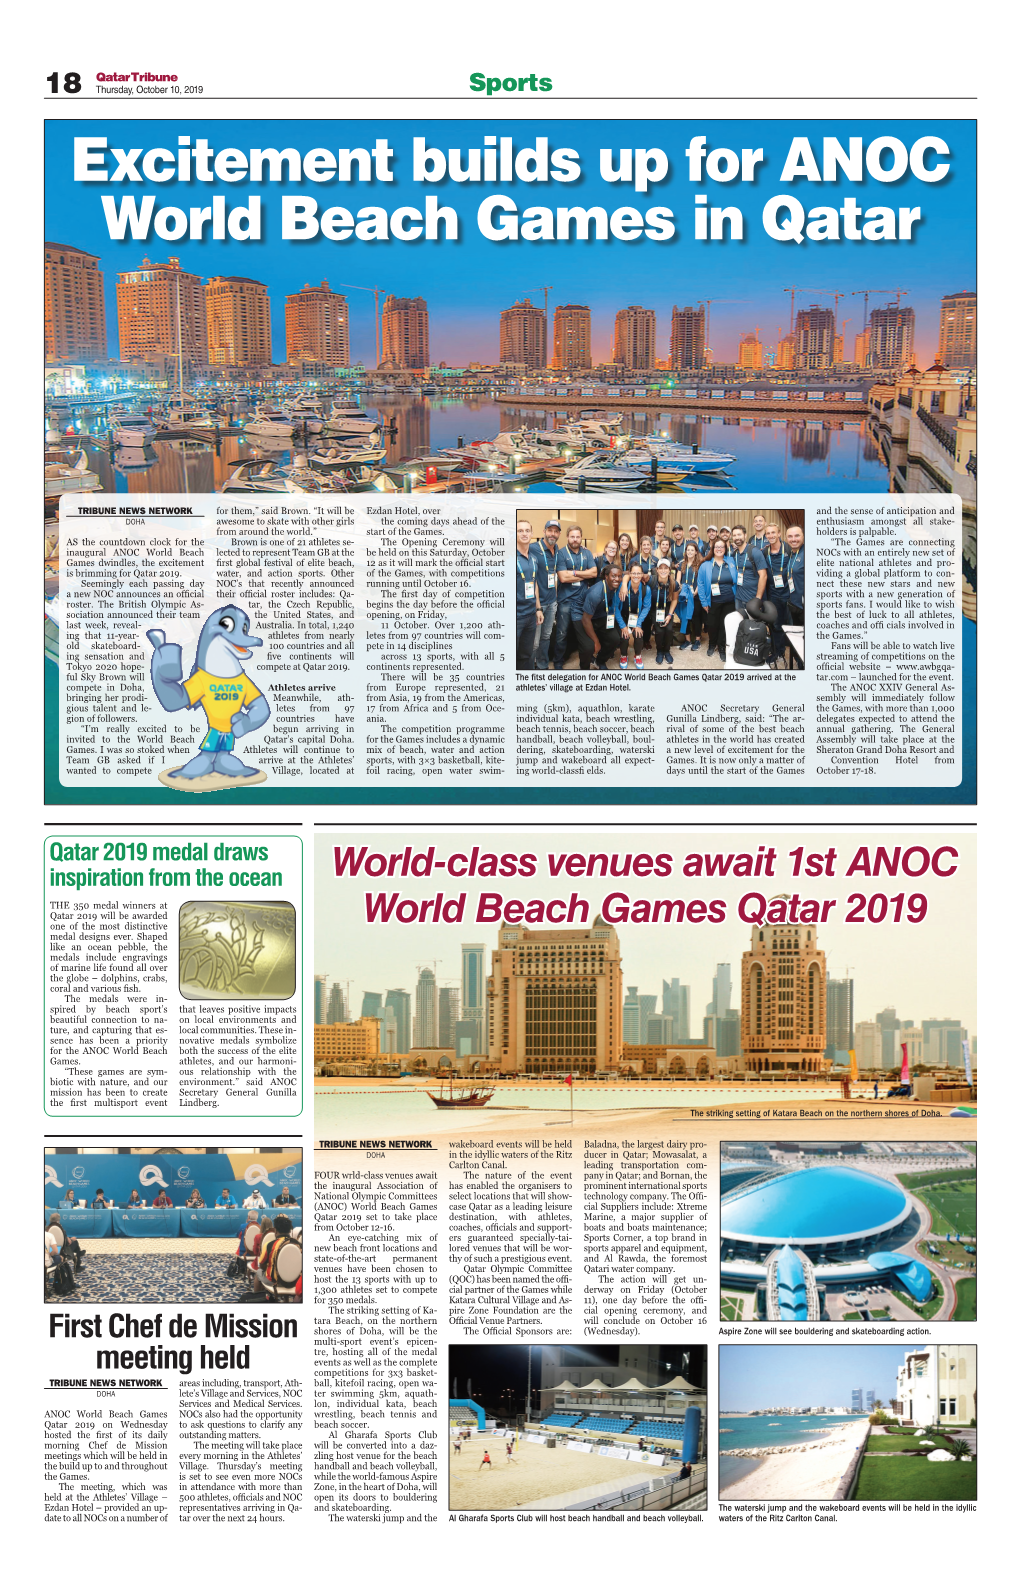 Excitement Builds up for ANOC World Beach Games in Qatar